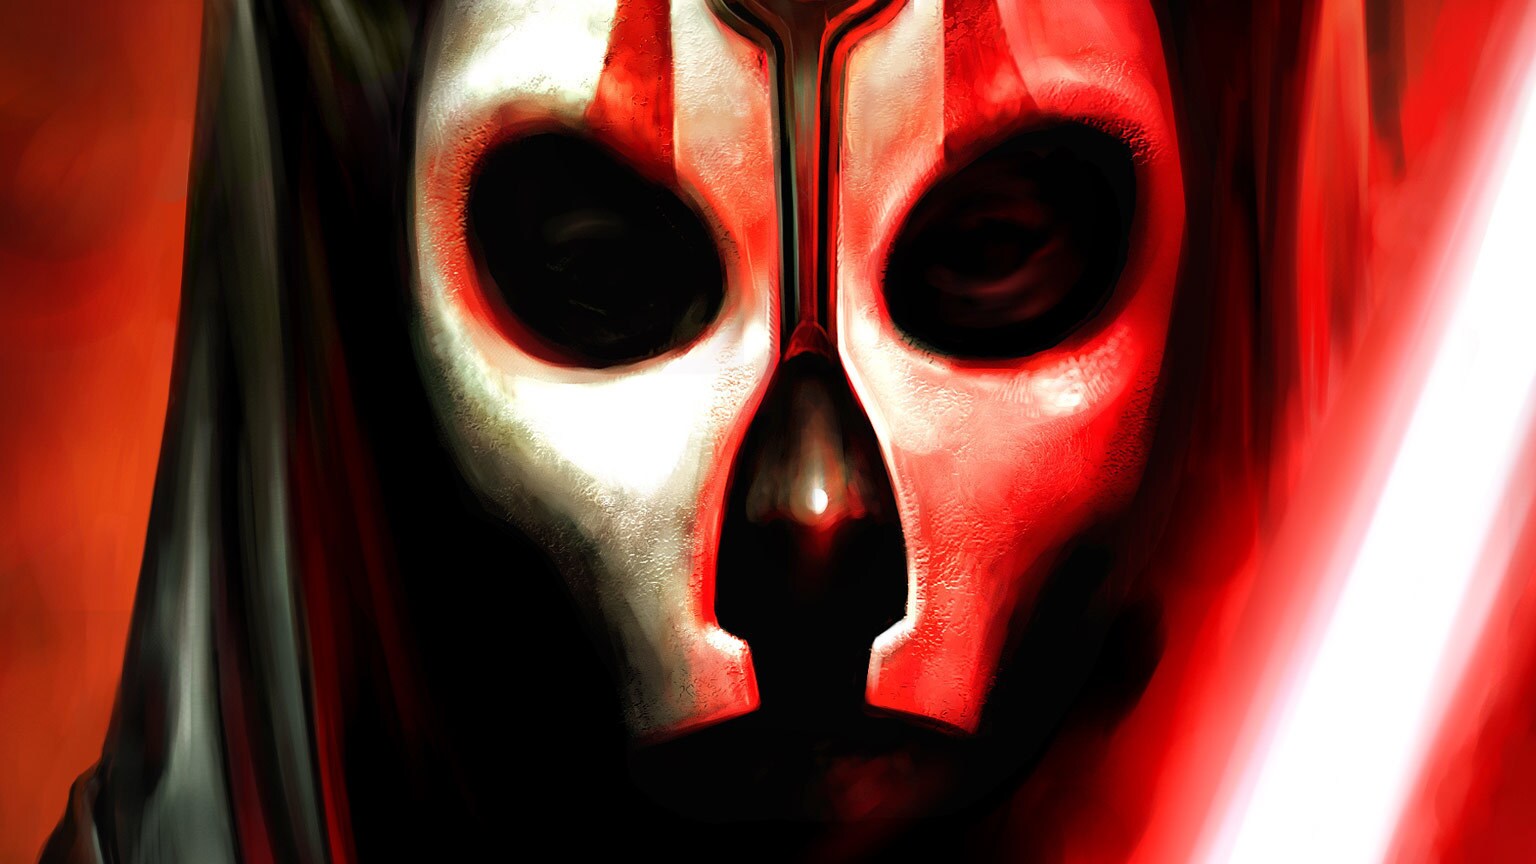 Star Wars: Knights of the Old Republic II — The Sith Lords Will Be Reborn on Mobile